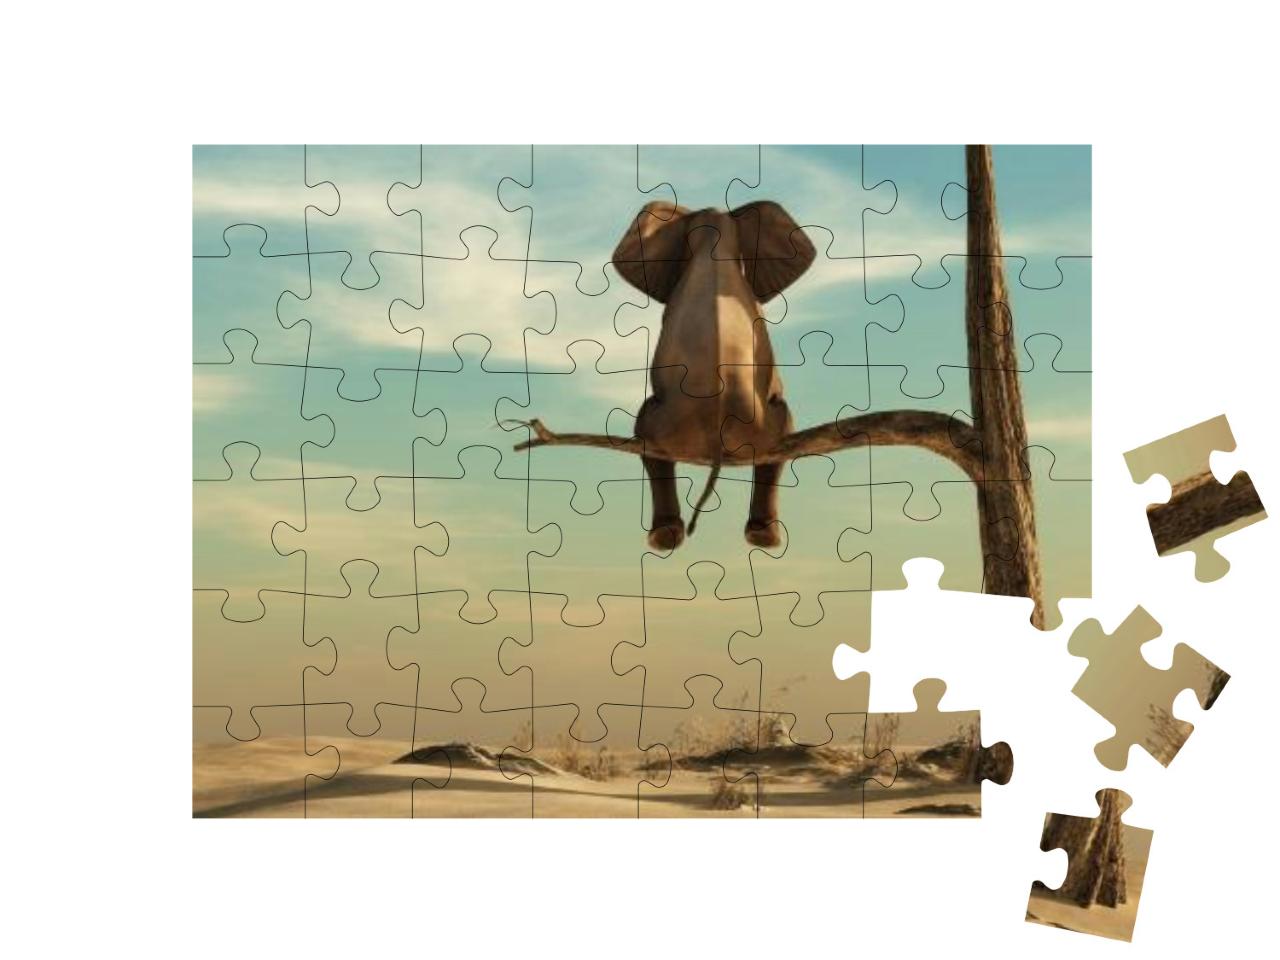 Elephant Stands on Thin Branch of Withered Tree in Surrea... Jigsaw Puzzle with 48 pieces